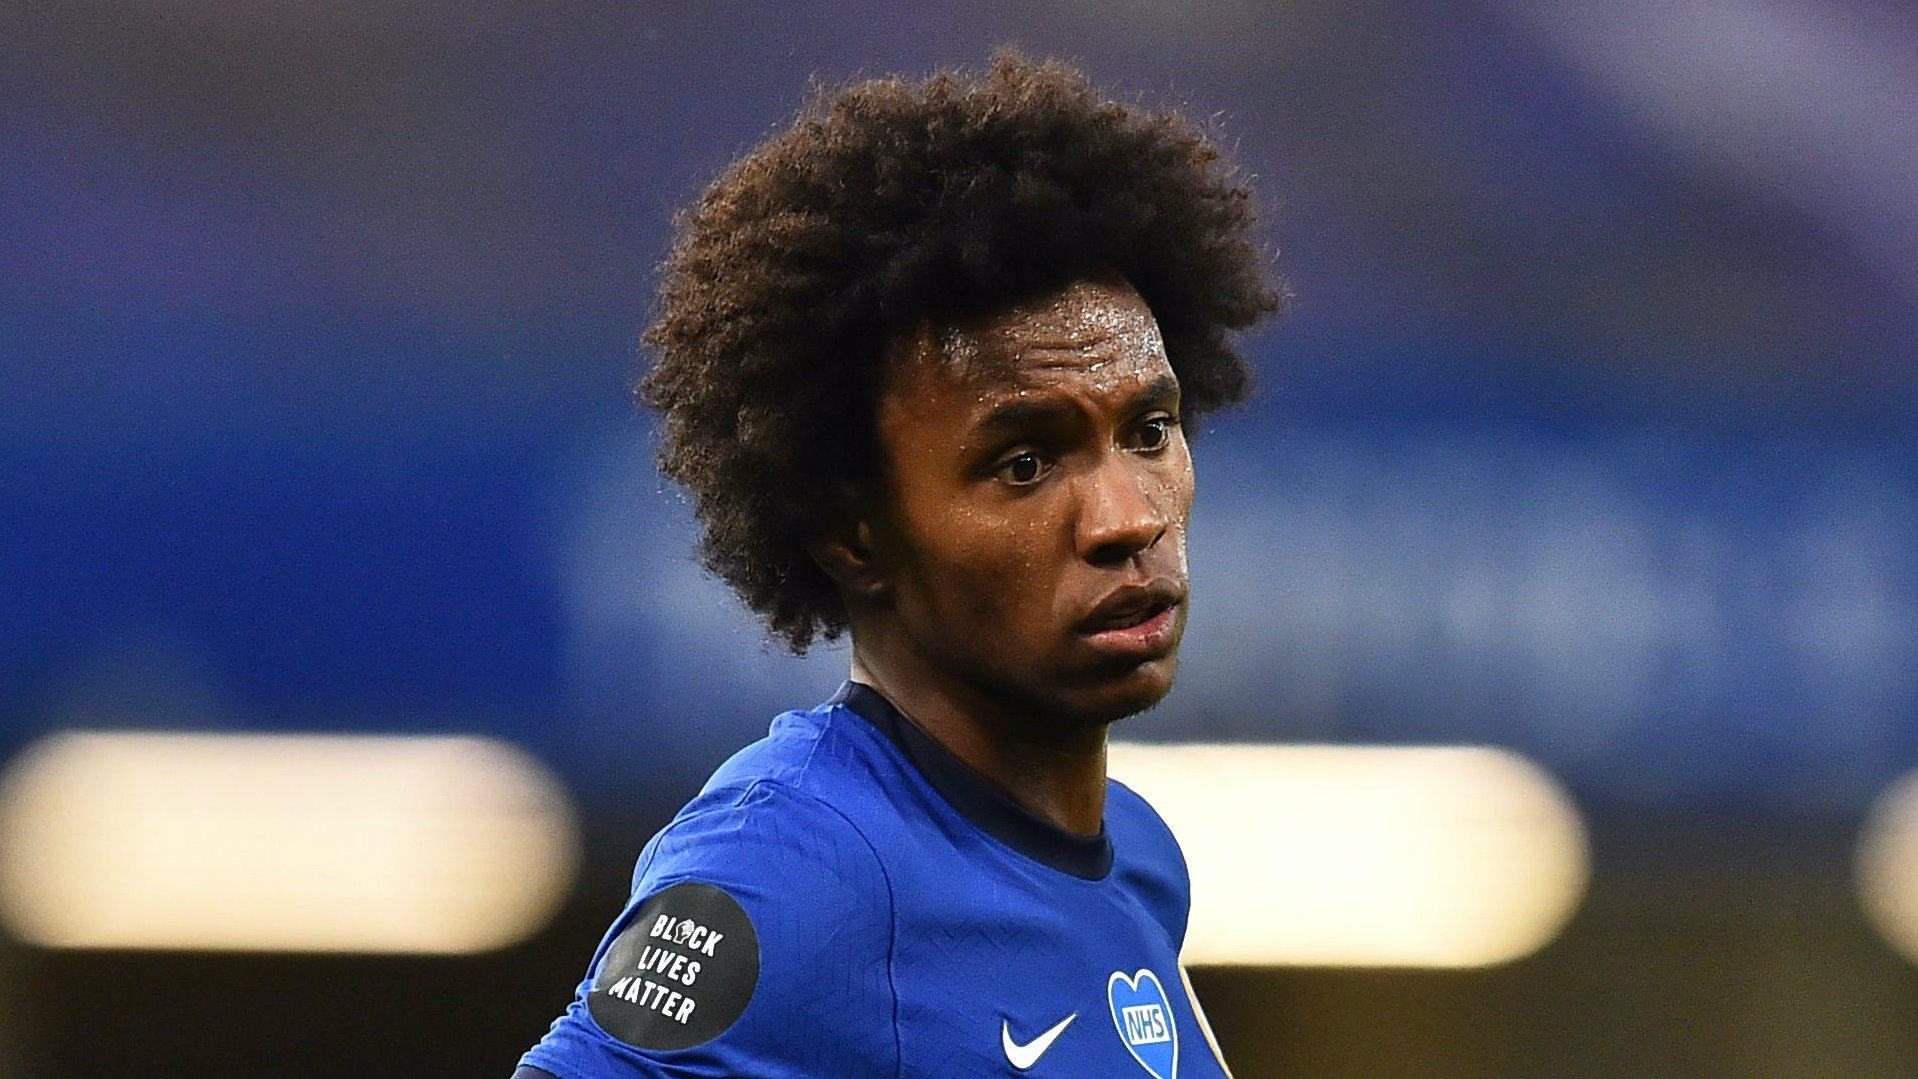 'The time has come to move on' - Willian confirms Chelsea departure with open letter to fans